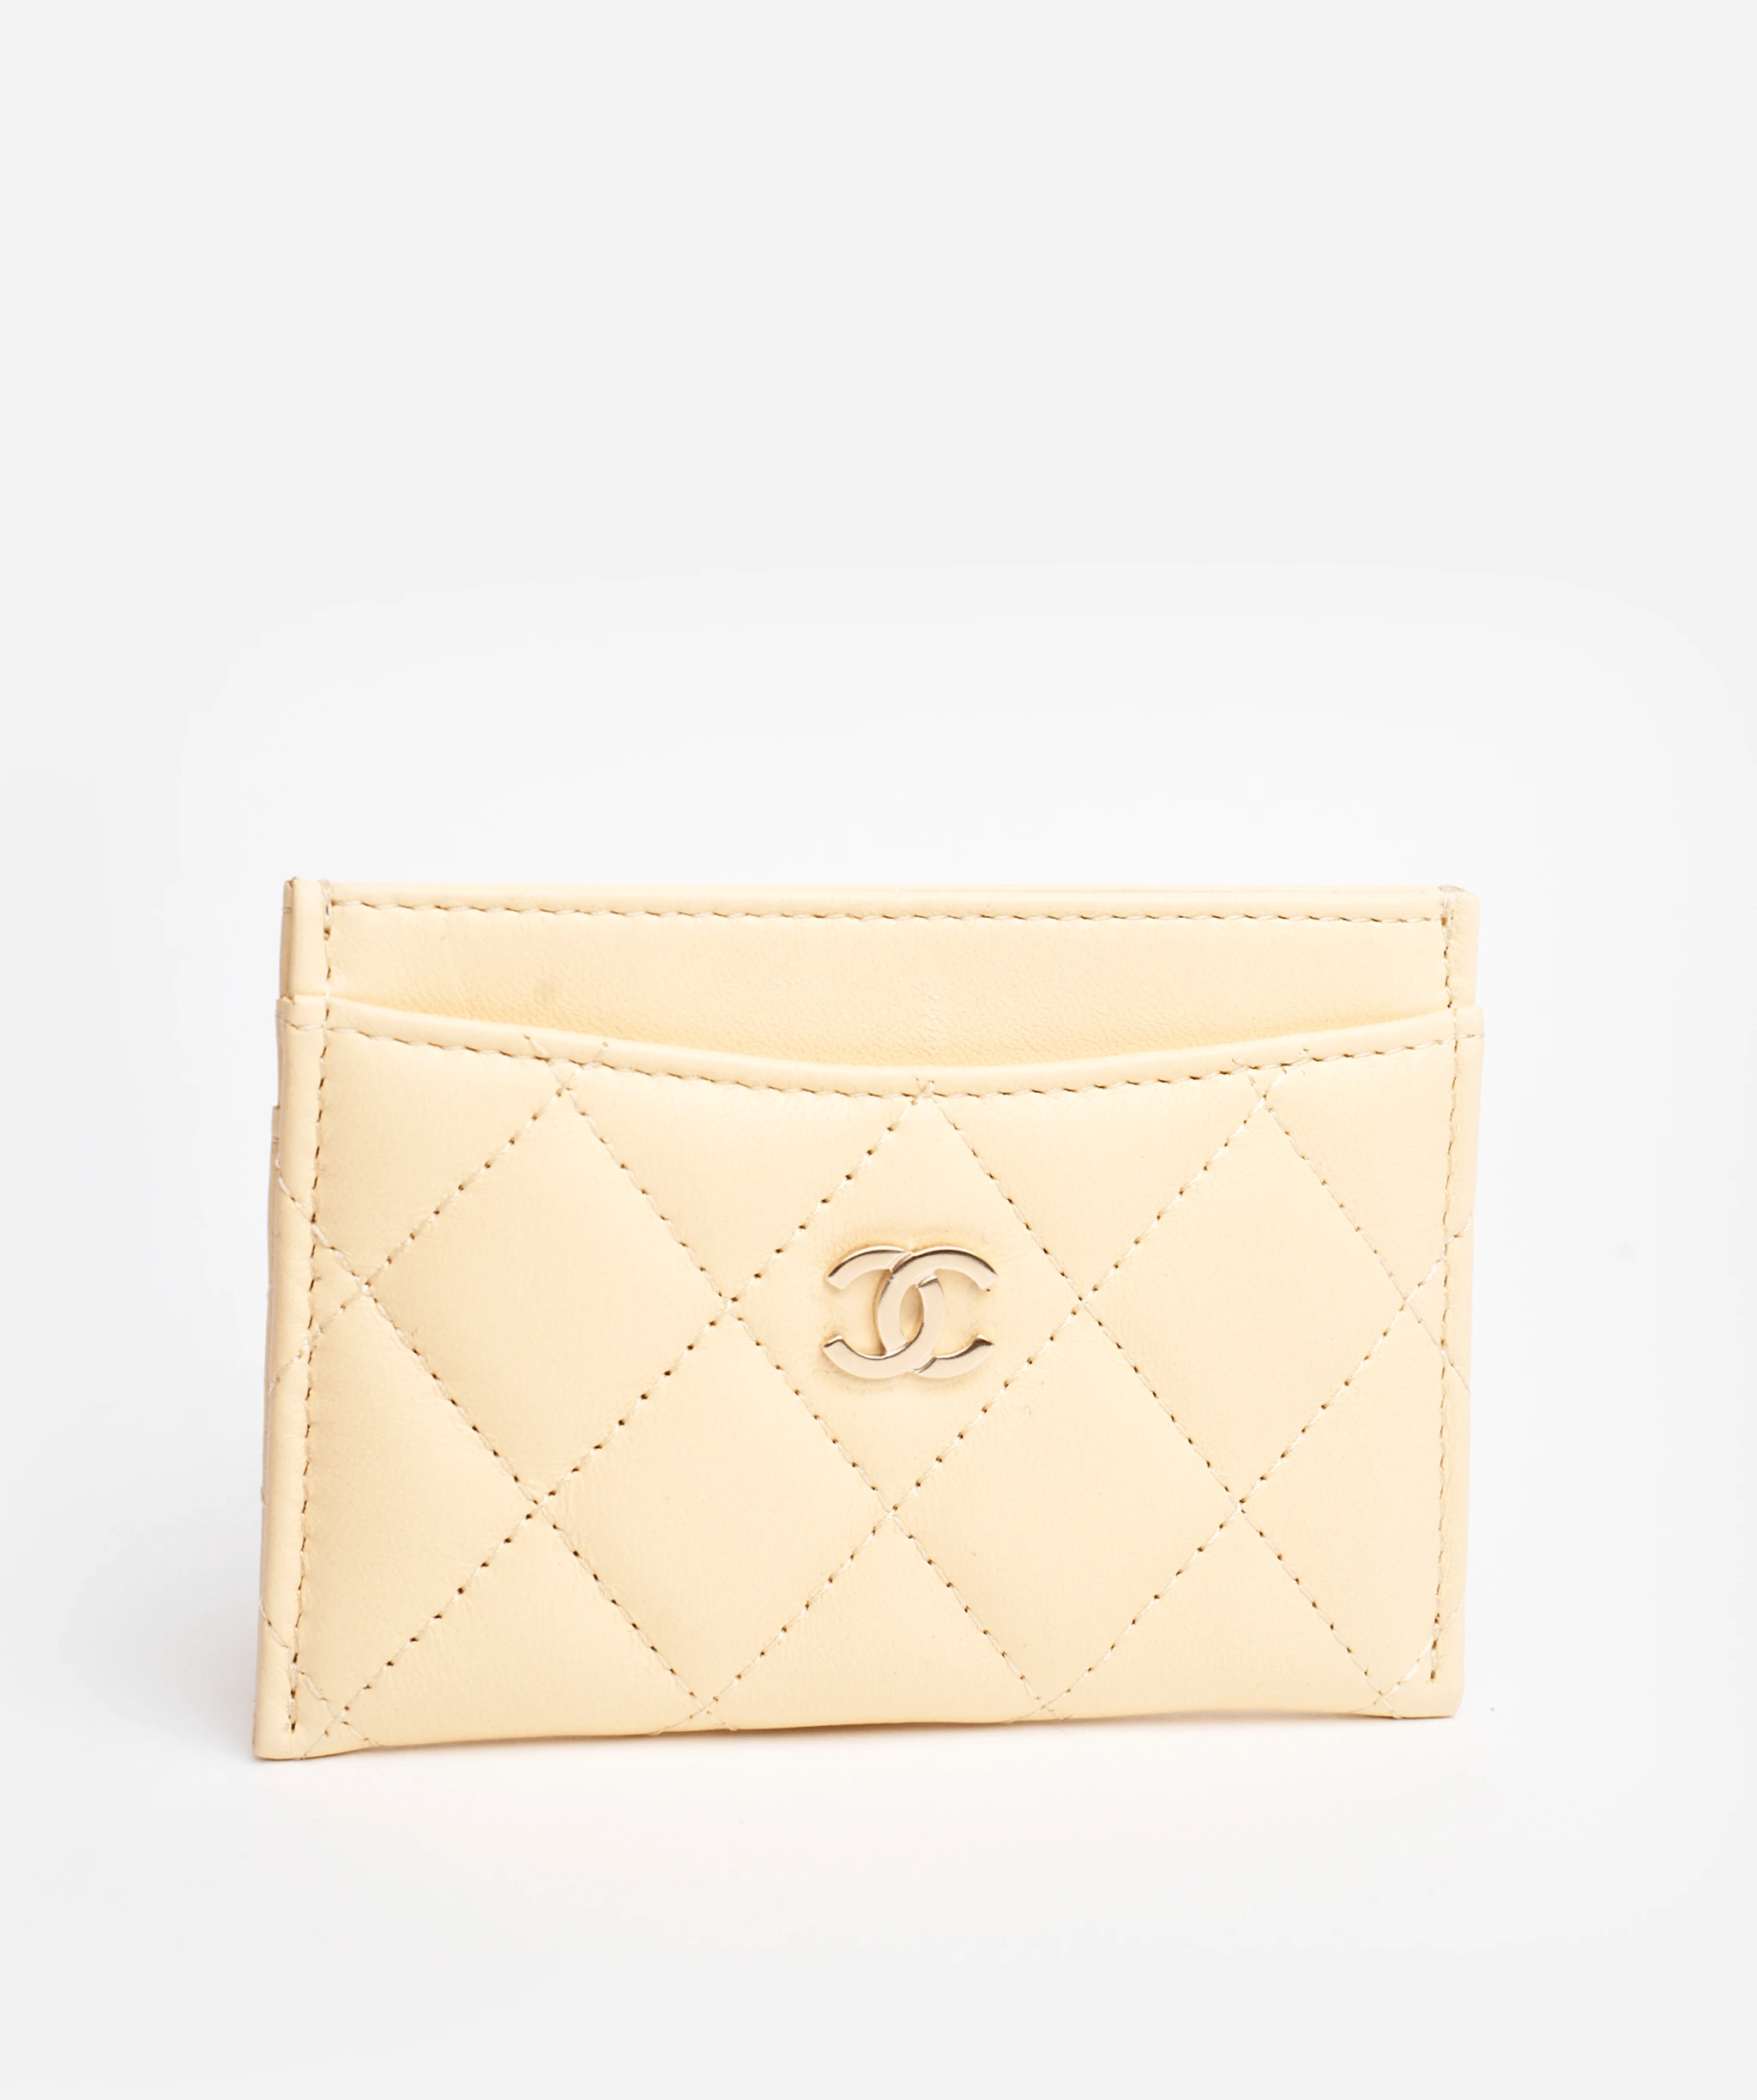 Chanel Chanel quilted card holder in cream